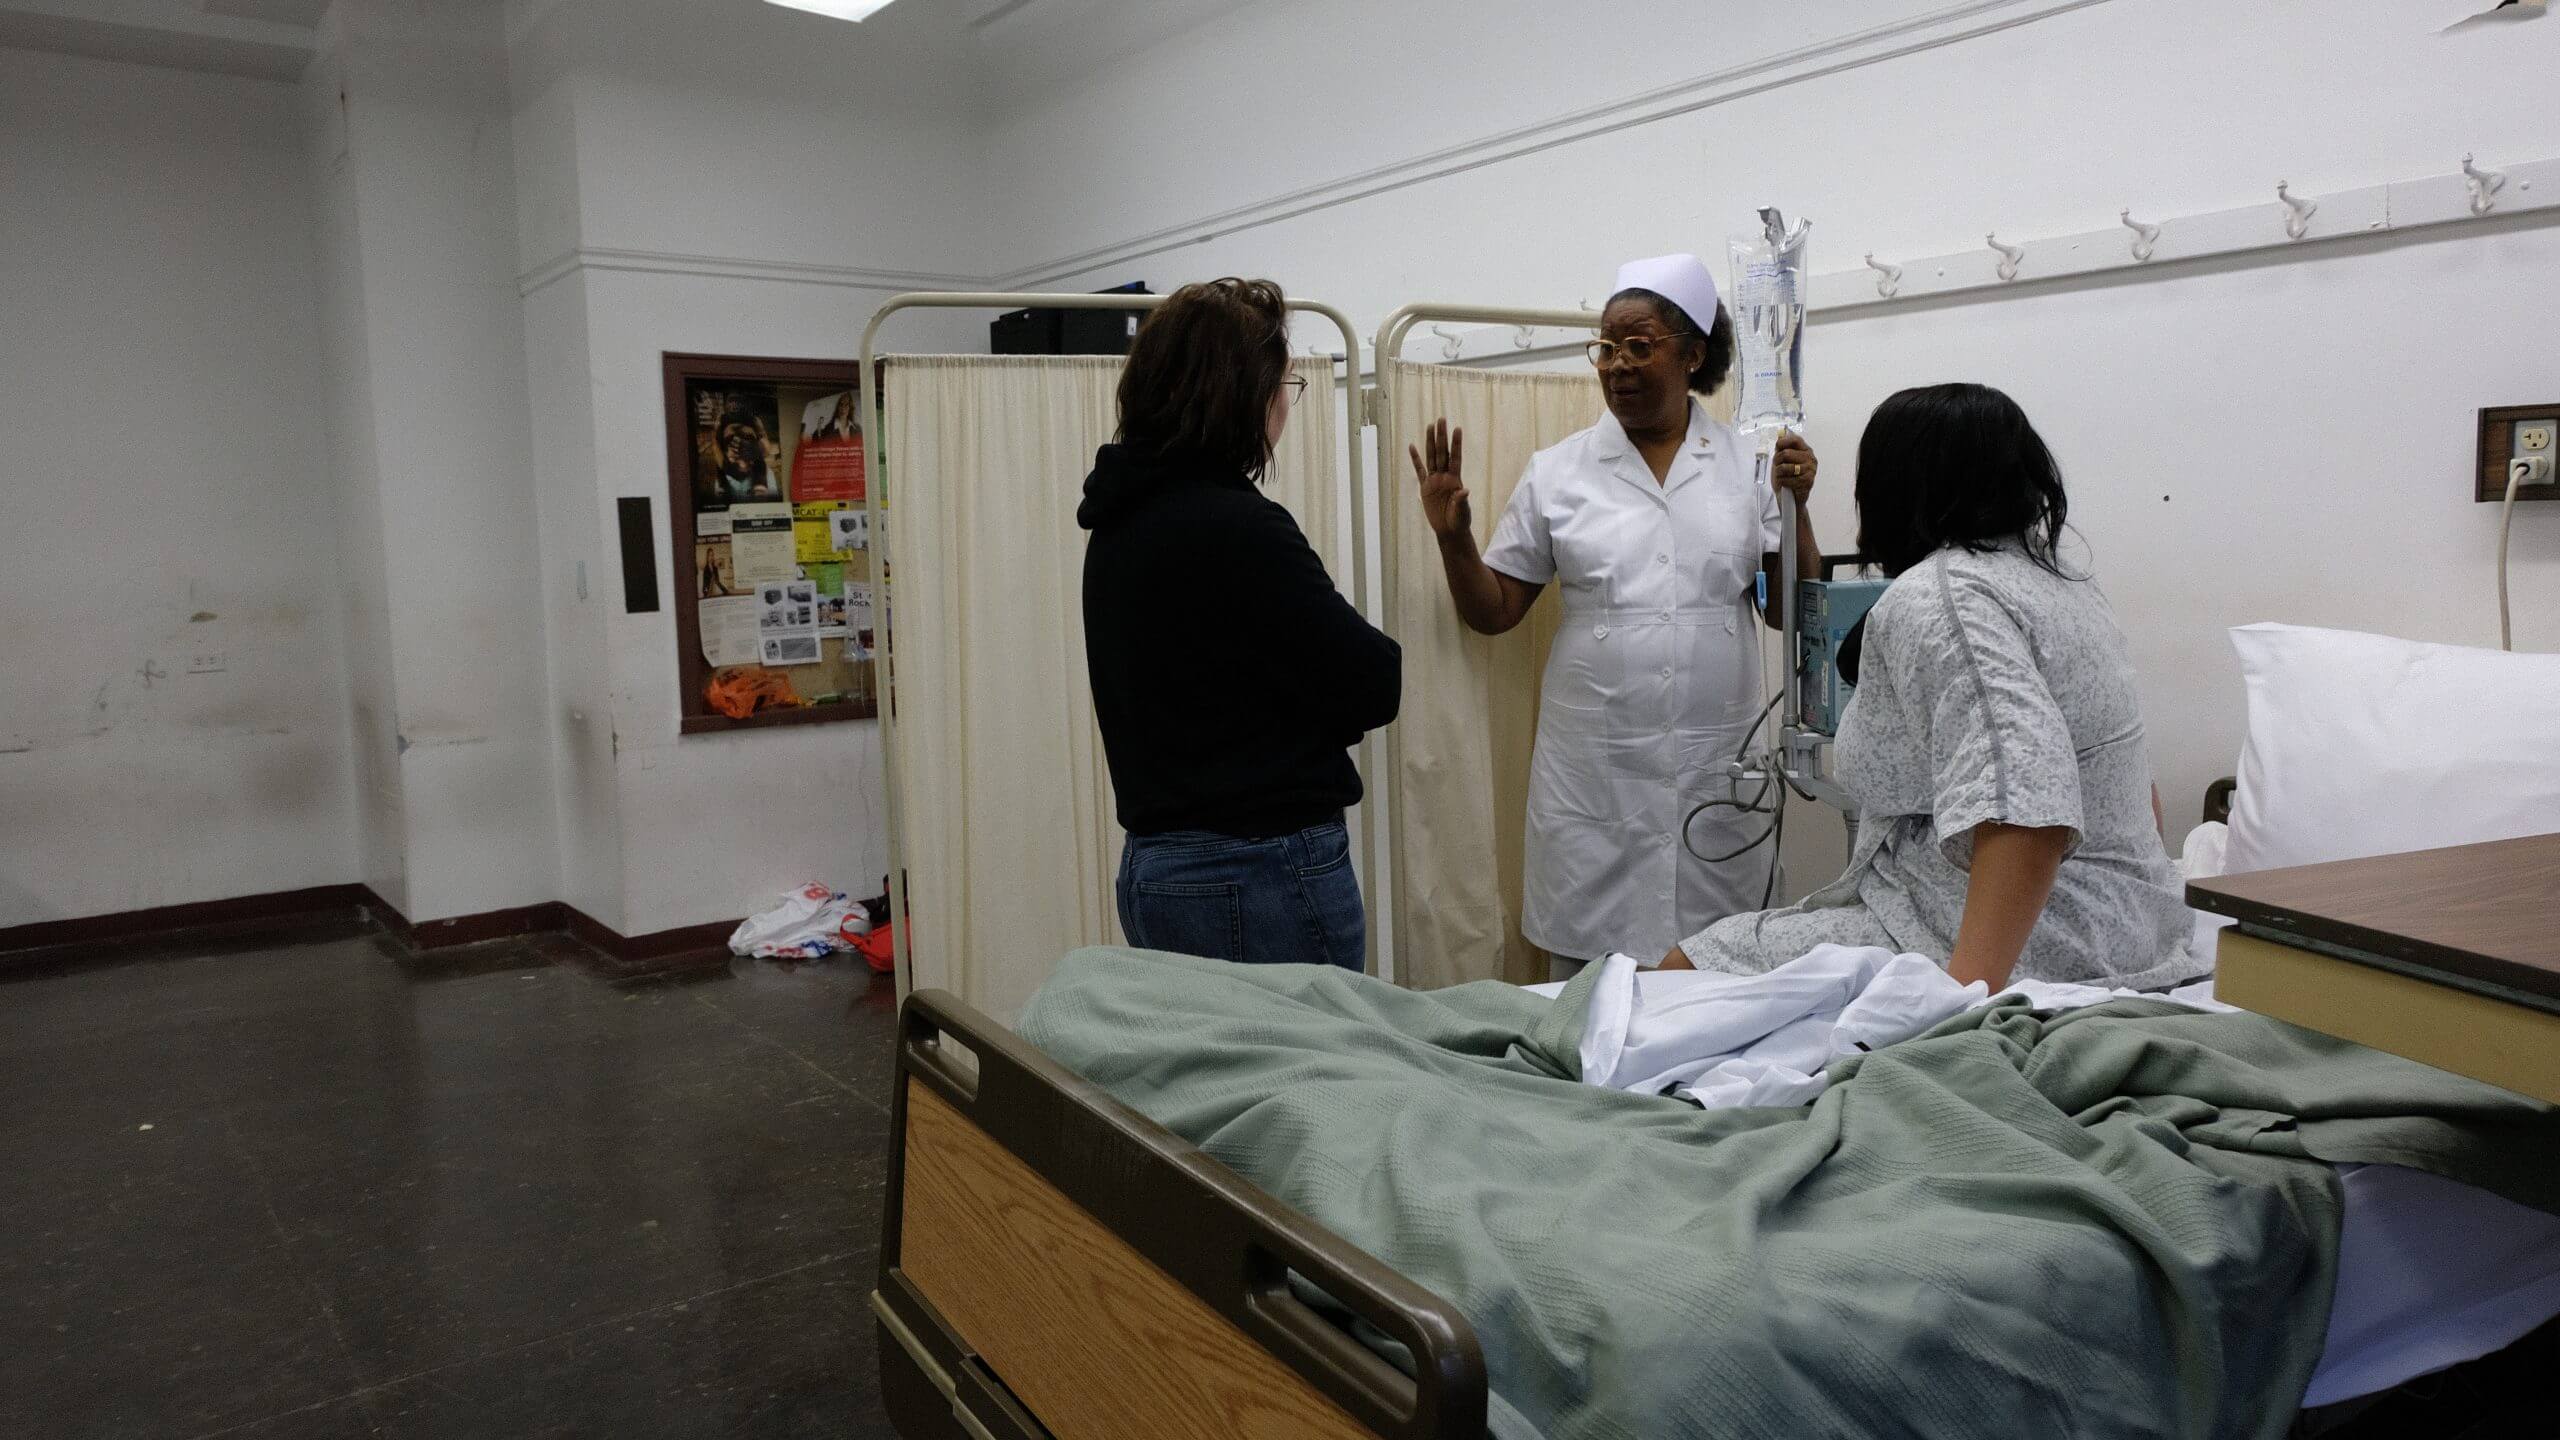 Director Emma Francis-Snyder talking to an actress dressed as a nurse, and an actress dressed as a patient sat on a bed